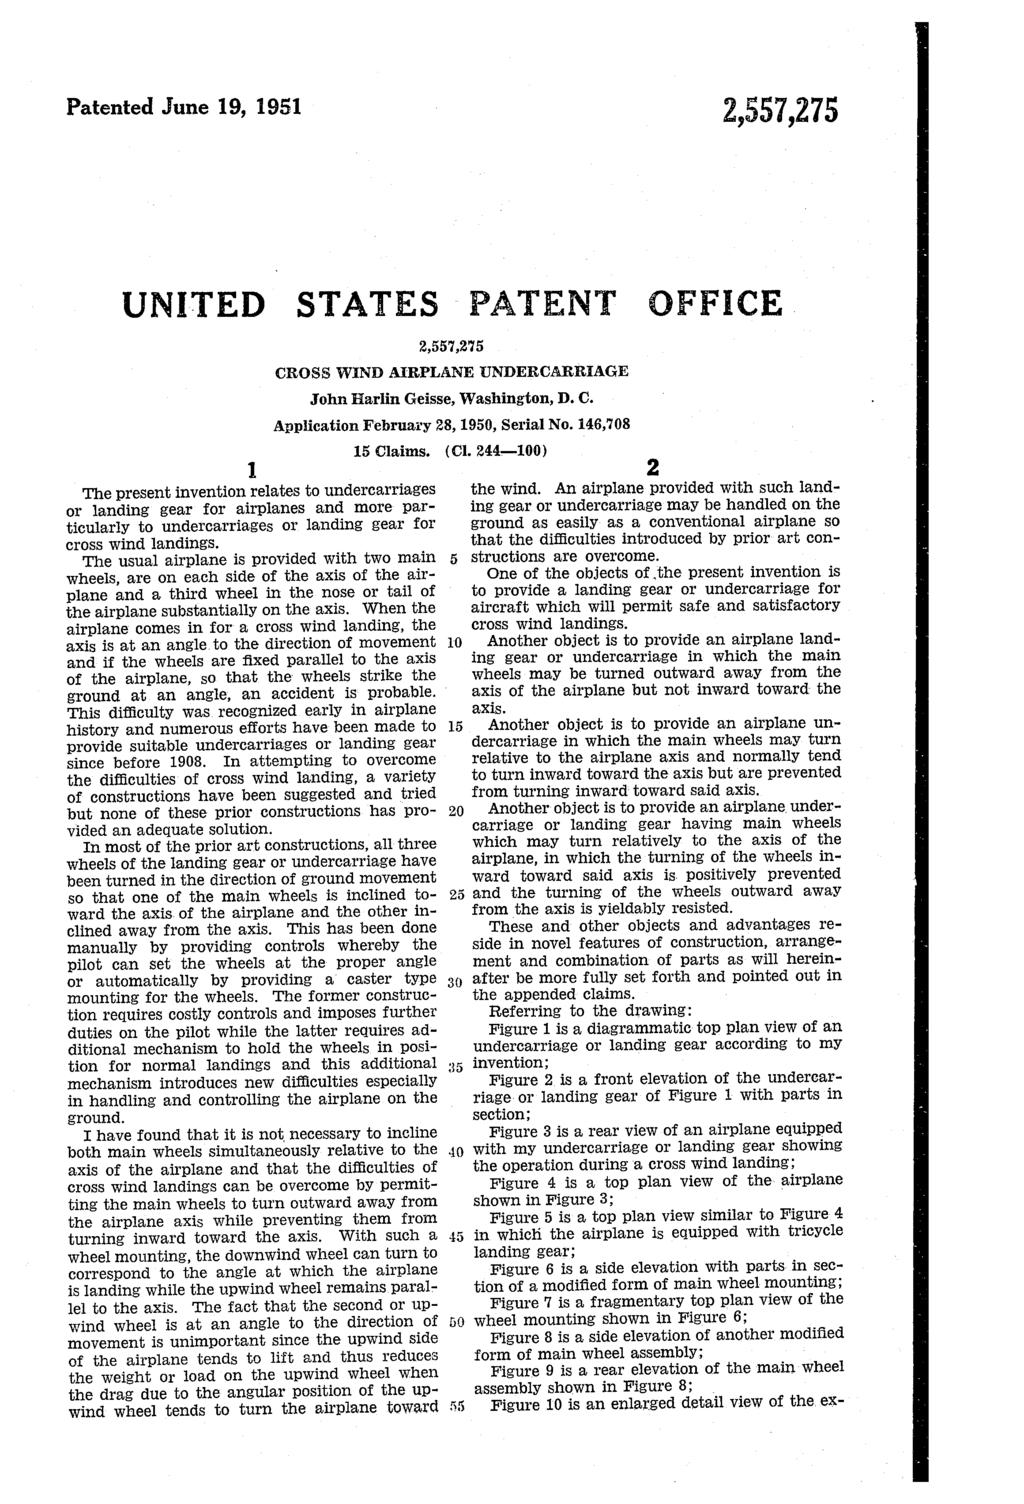 Patented June 19, 1951 2,557,275 UNITED STATES PATENT OFFICE 2,557,275 CROSS WIND ARPANE UNDERCARRAGE John Harlin Geisse, Washington, D.C. 1. The present invention relates to undercarriages or landing gear for airplanes and more par ticularly to undercarriages or landing gear for cross Wind landings.